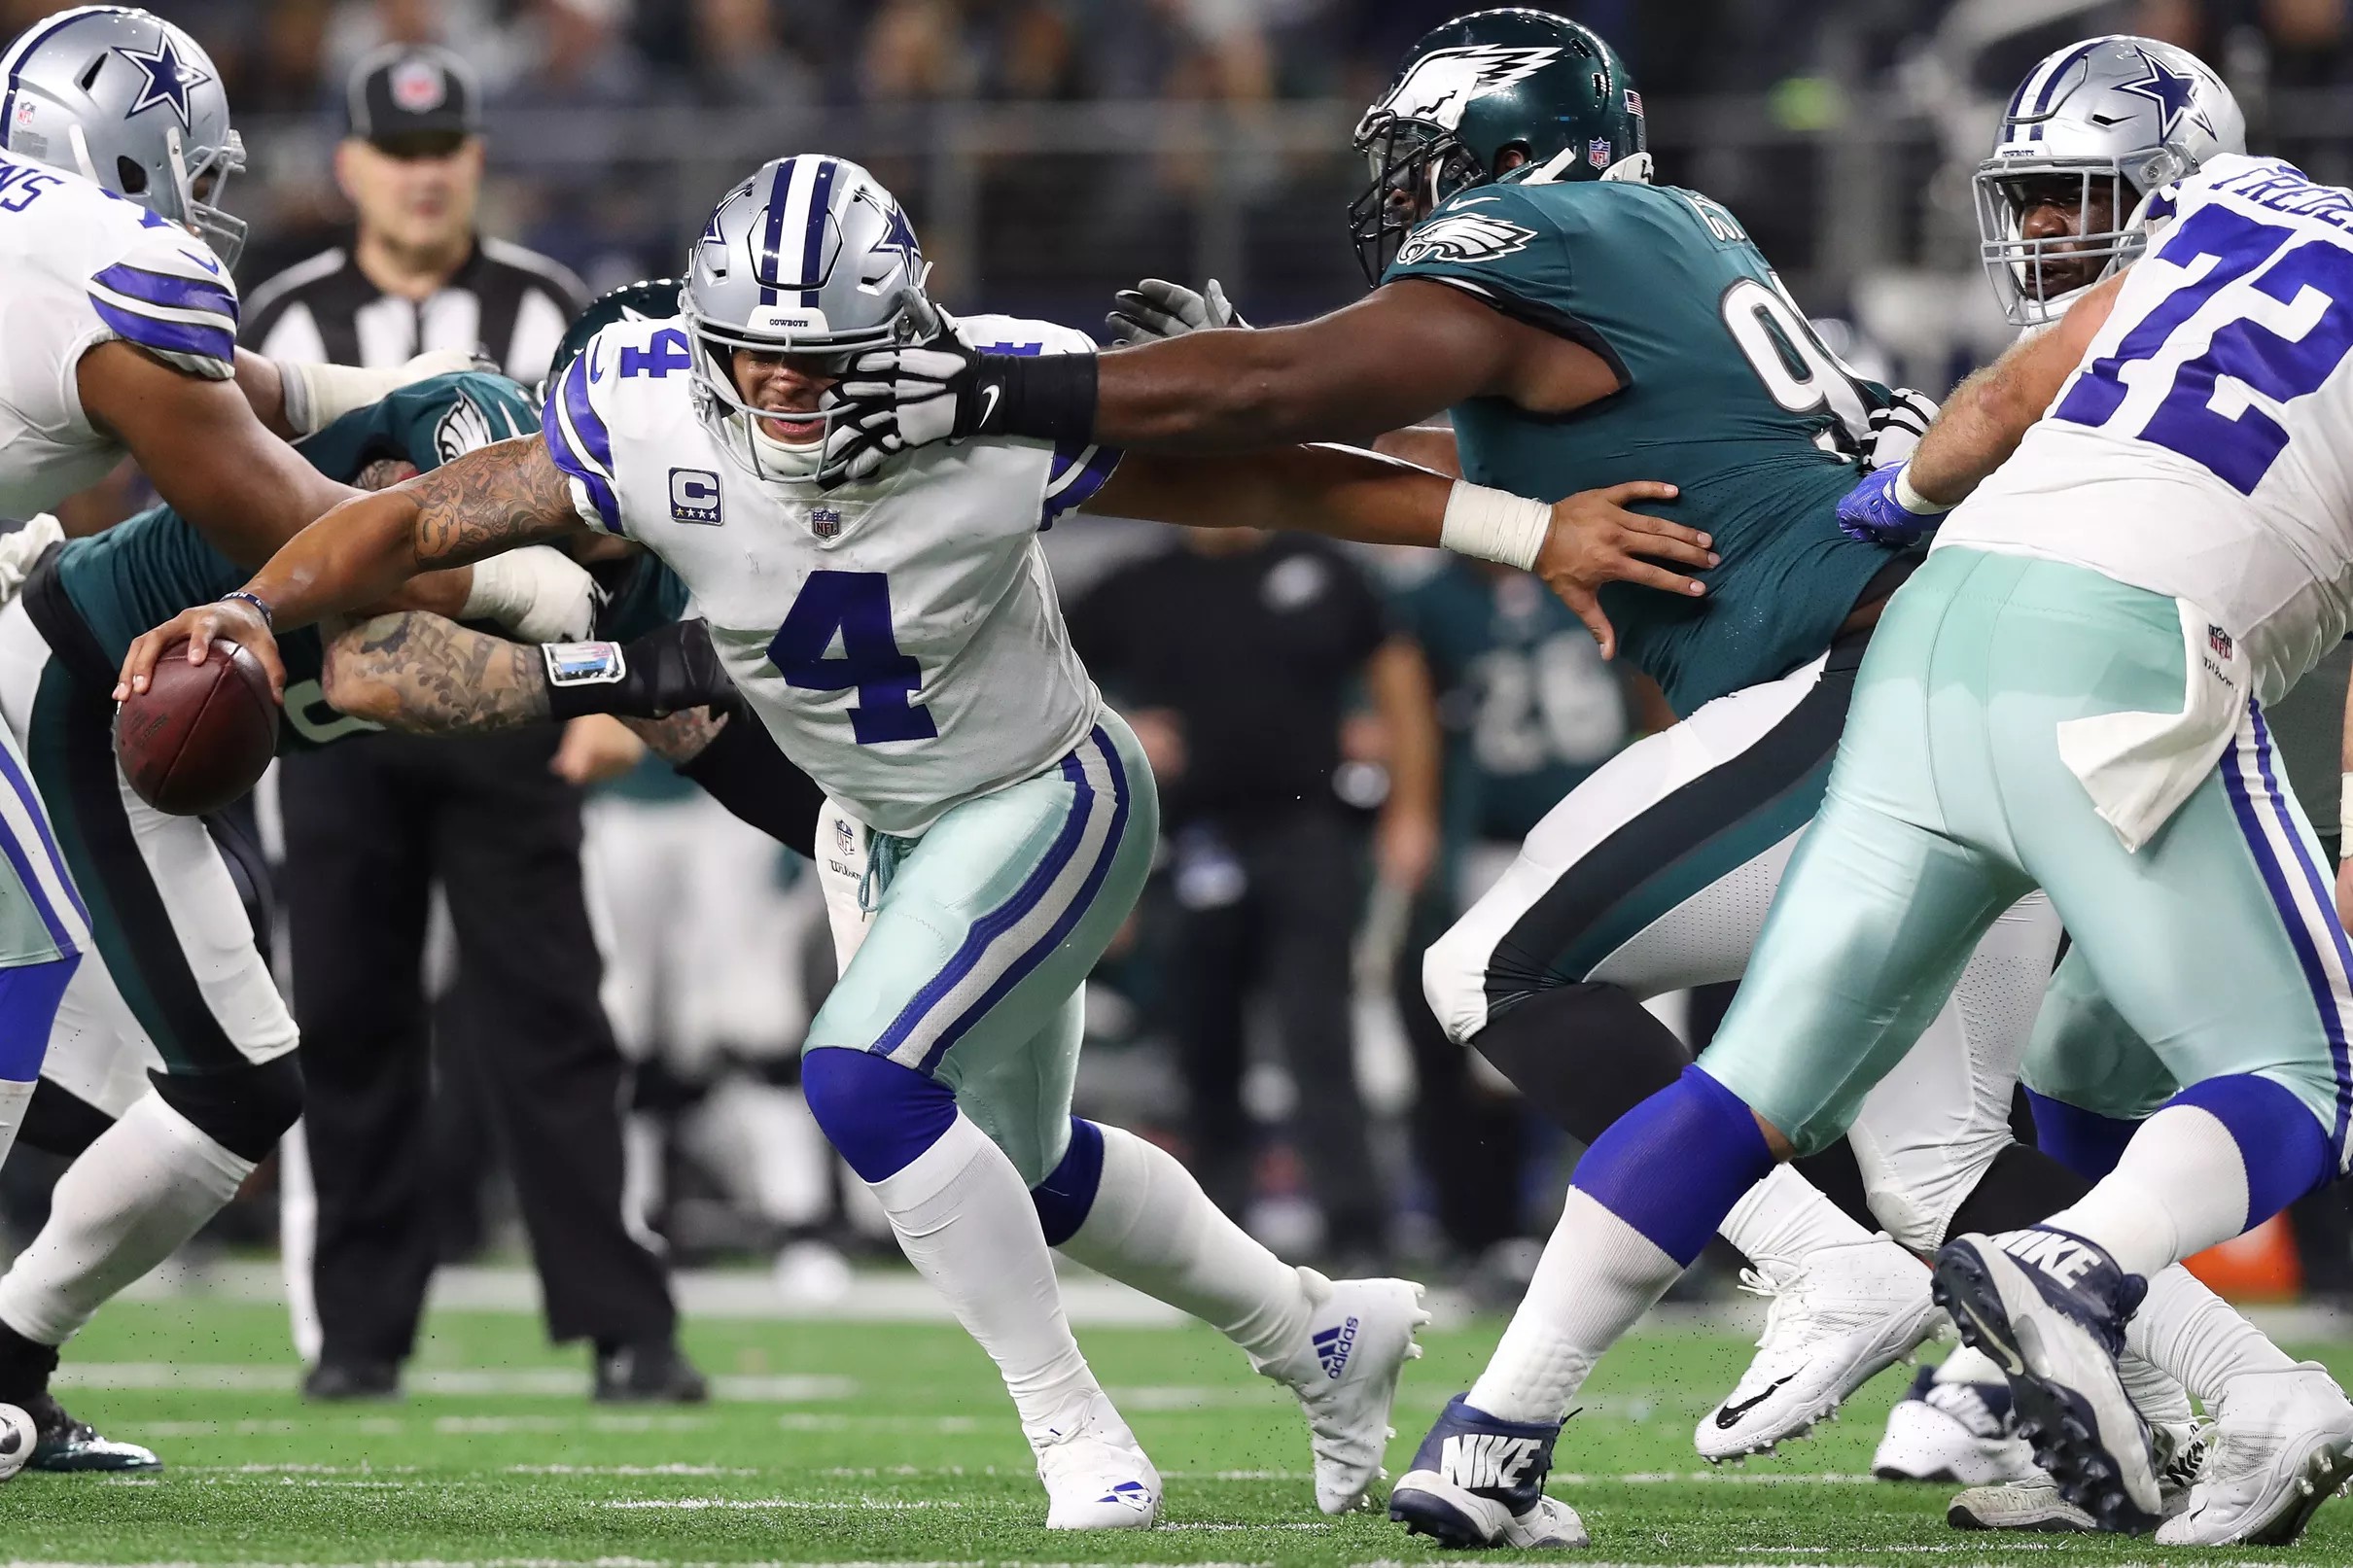 Cowboys vs. Eagles: Five critical plays that shaped the game